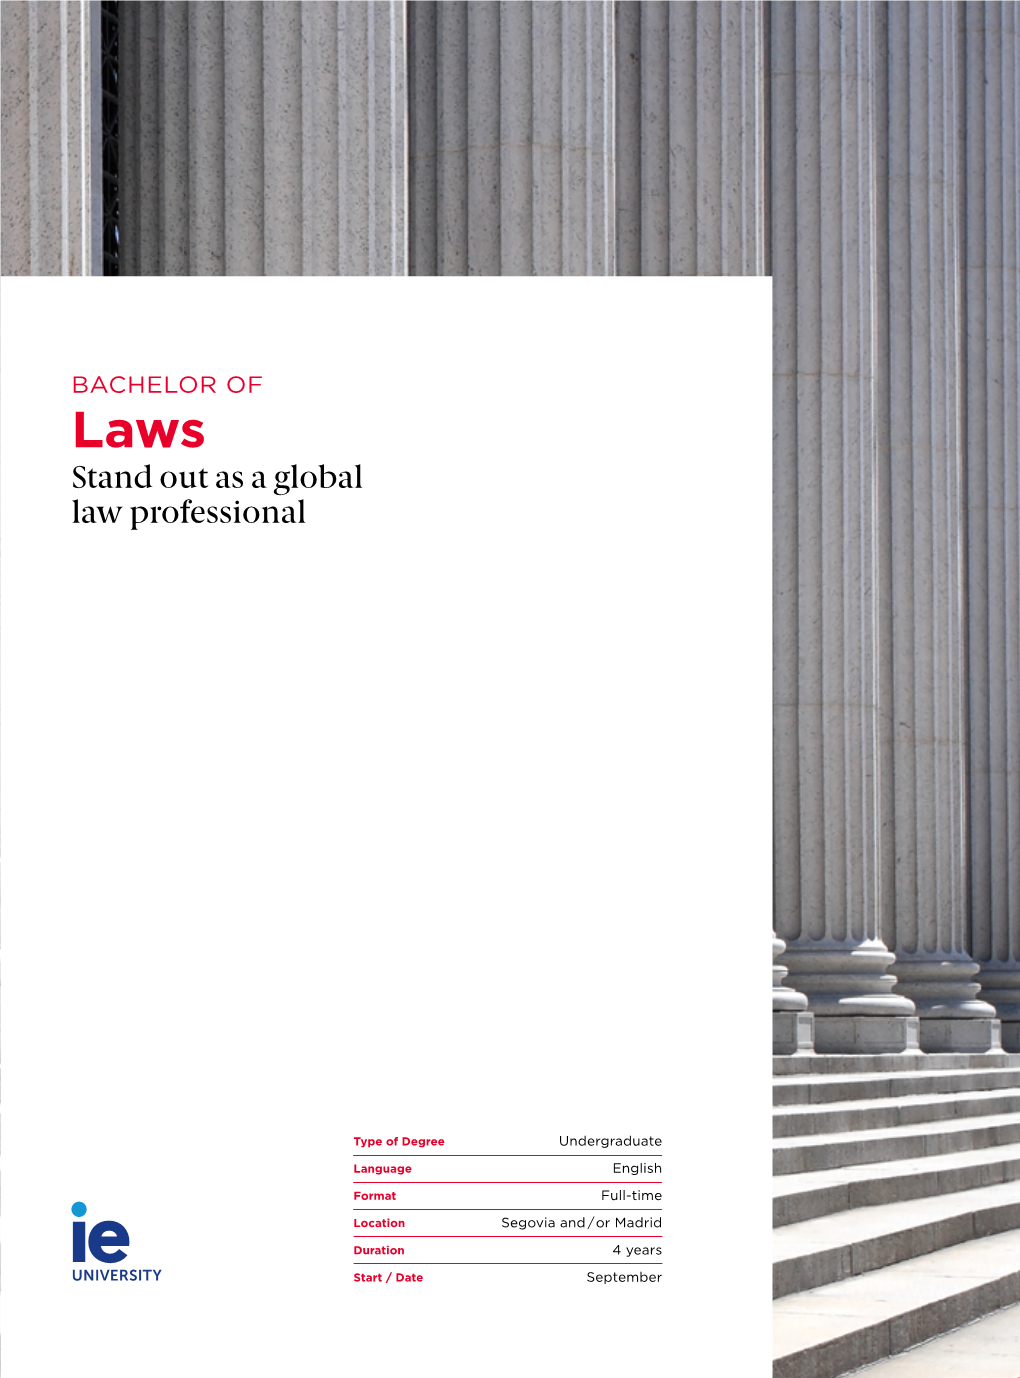 Stand out As a Global Law Professional Understand the Role of Multilateral Organizations, States, and the Corporate World in Shifting the International Order